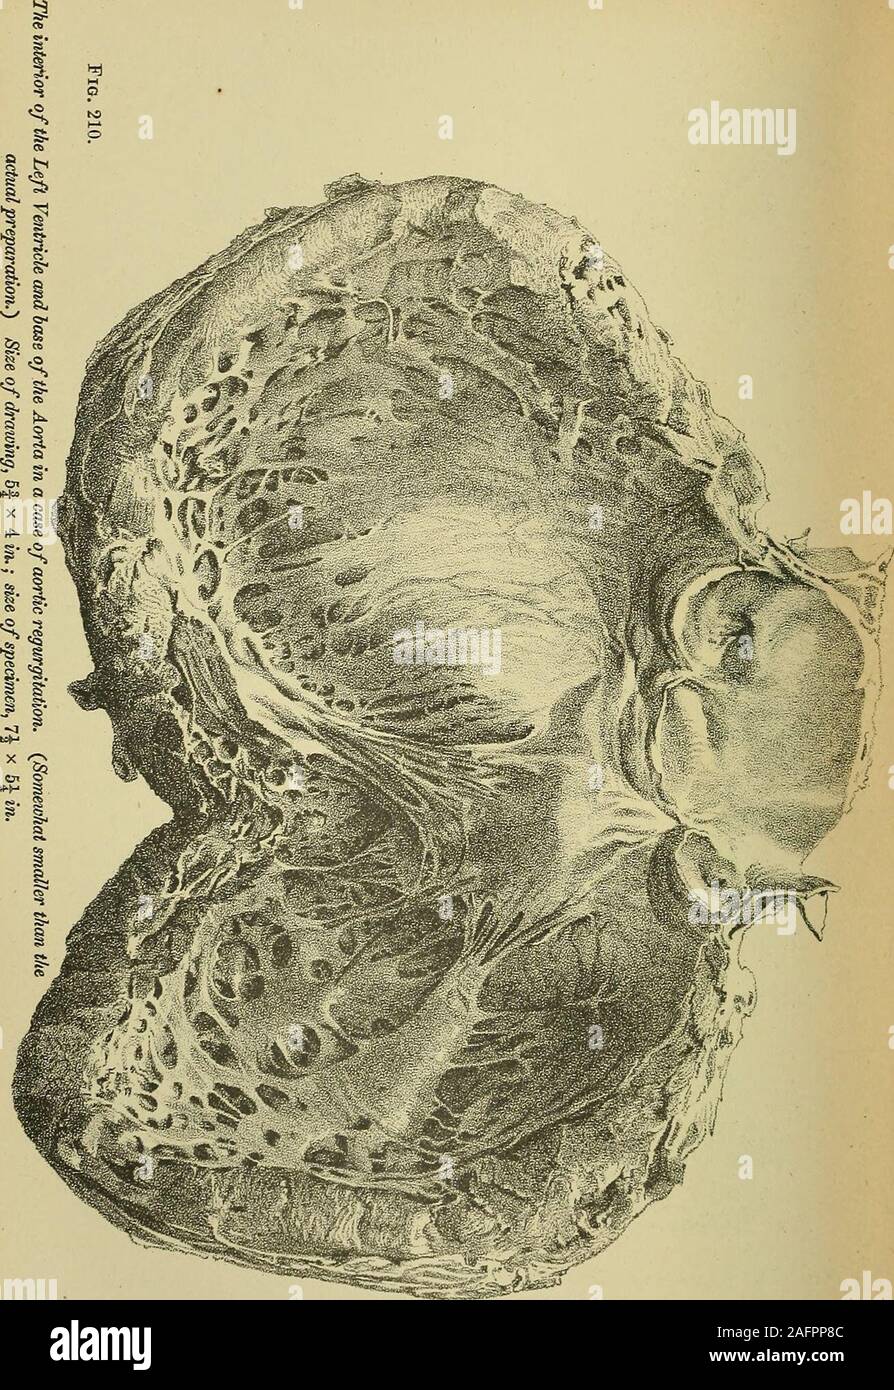 . Diseases of the heart and thoracic aorta. Fig. 209. Atheroma of the hose of the Aorta: Obstruction of the orifices of the Coronary Arteries ;Extreme incompetence of Ike Aortic Valve. {Natural size.) The base of the aorta is markedly atheromatous, and contains several large, flat, smoothcalcareous plates; the orifice of one of the coronary arteries (a), is completely occluded, whilethat of the other (fr) is very much narrowed; the segments of the aortic valve are thickenedand crumpled; the valve was extremely incompetent. M°UiAHJiCu&gt;iMii.e,LiT)ic?.Ei&gt;i r g 5 o ° I. yEtiology and Patholo Stock Photo